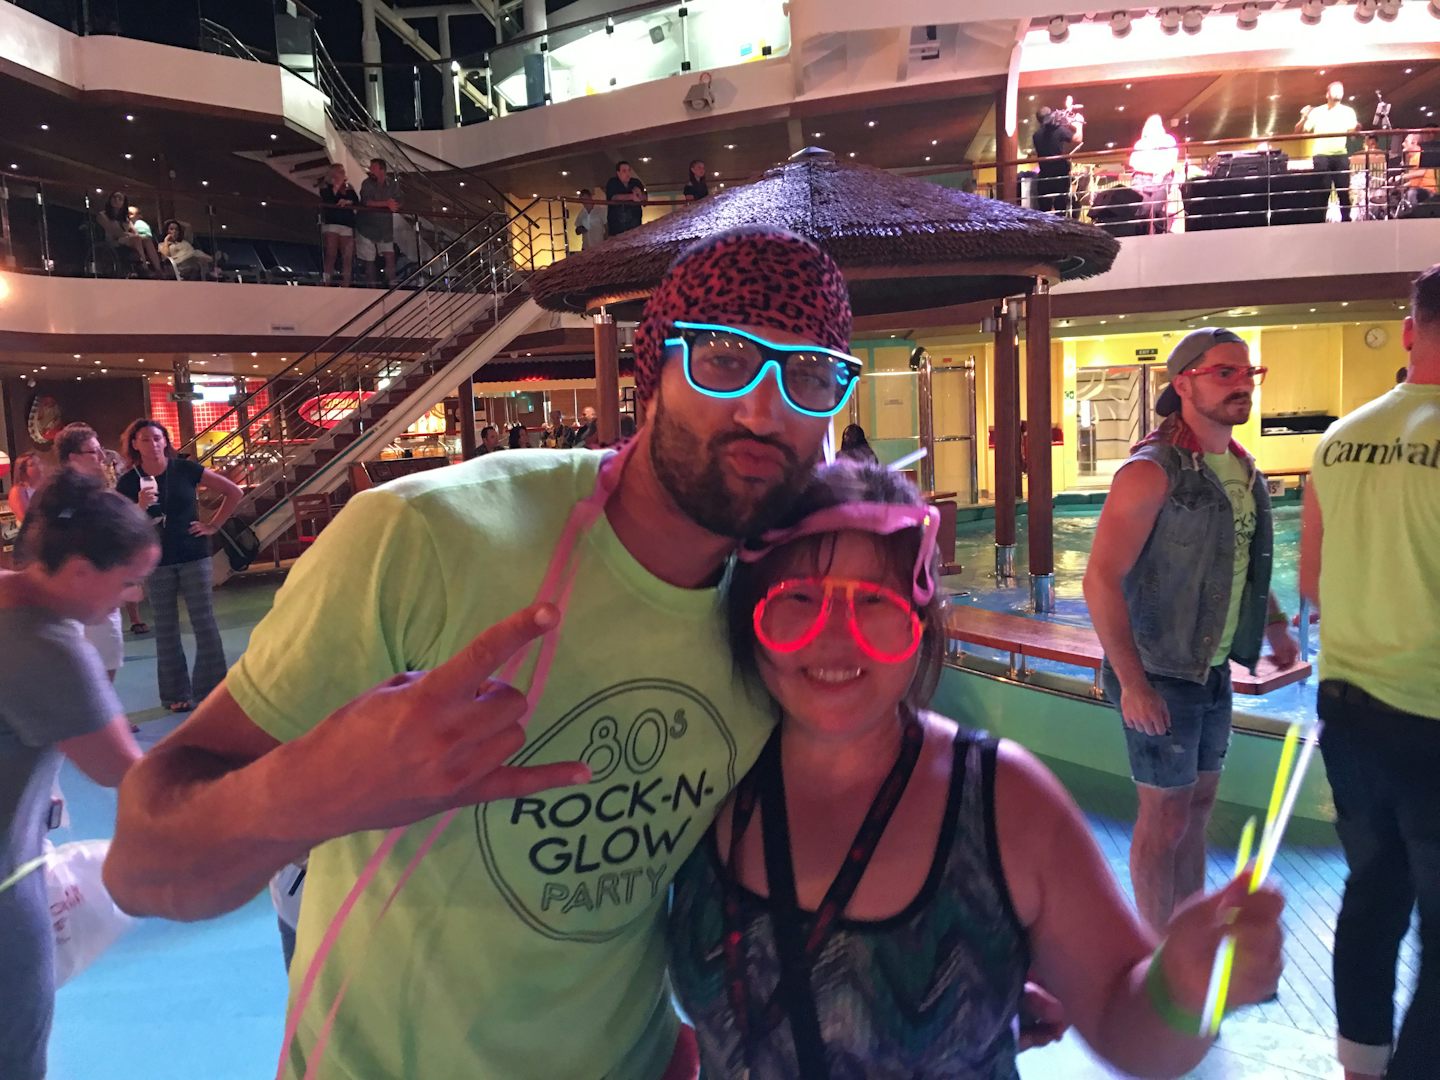 When cruise director loses his mind!